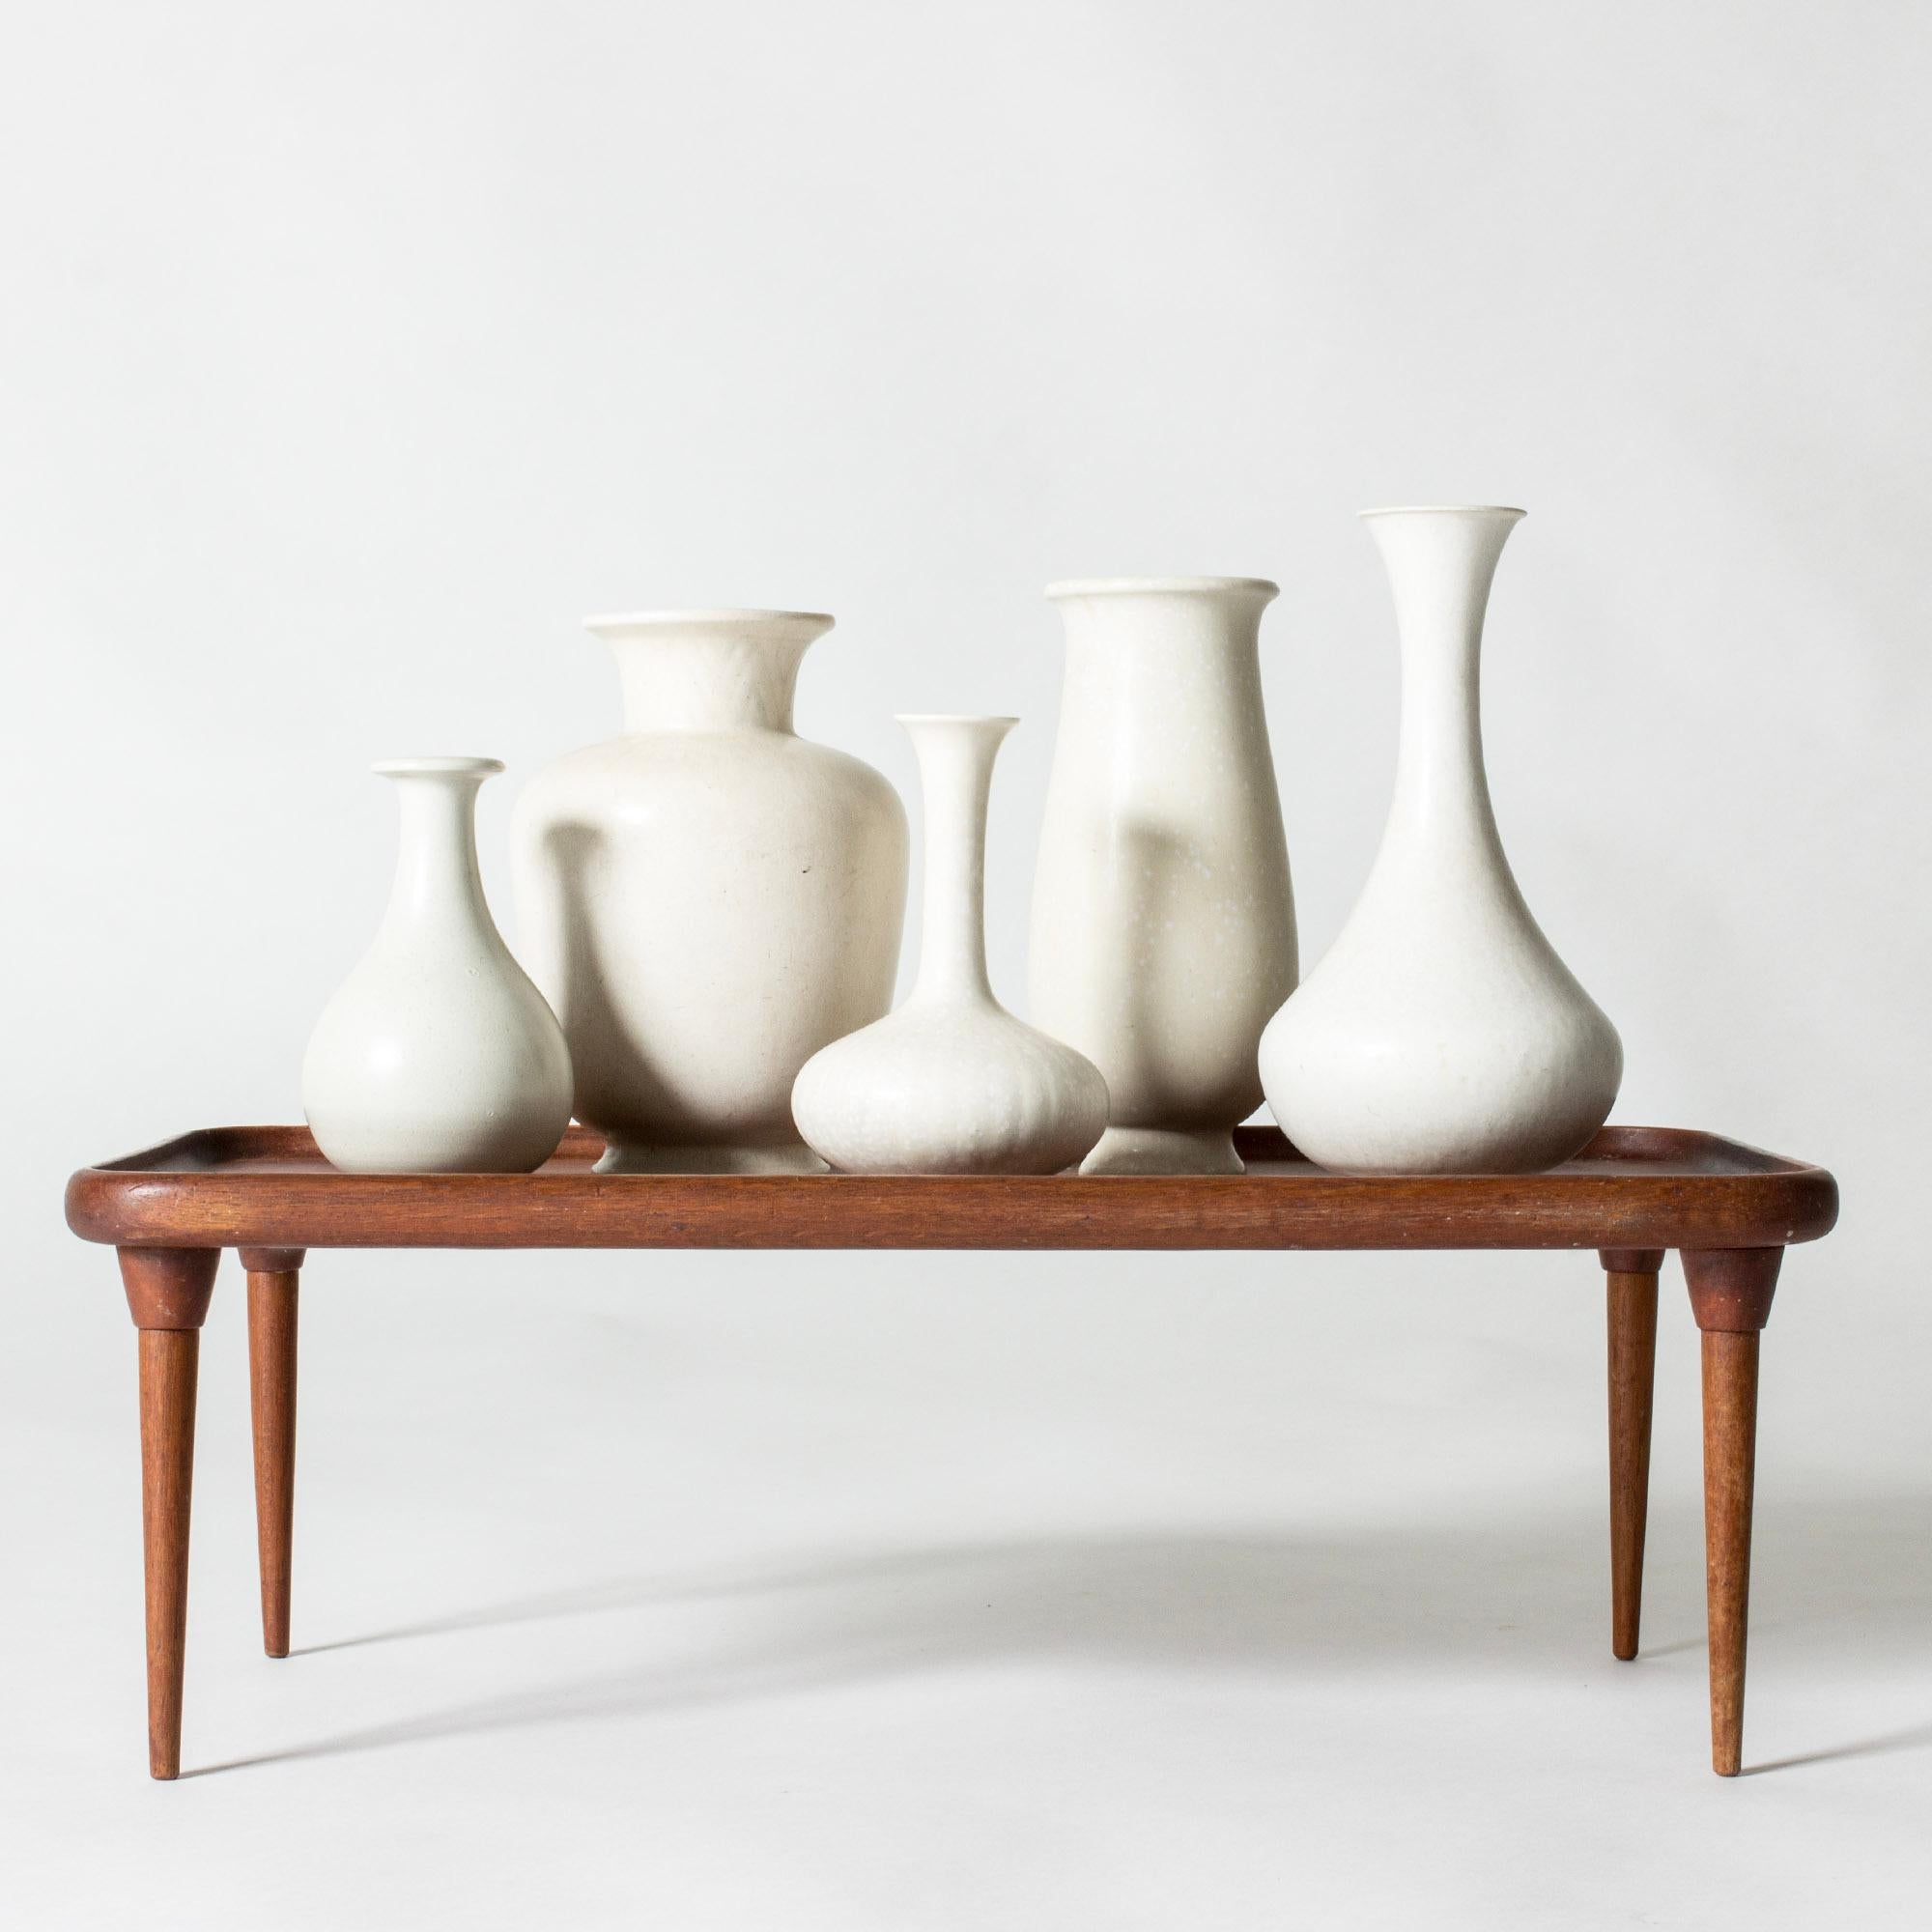 Set of five stoneware vases by Gunnar Nylund, in a variation of elegant, curvesome forms and sizes. All glazed beautiful eggshell white.

Height 14/15.5/19/20/22.5 cm, Diameter 8-13.4 cm.

Gunnar Nylund was one of the most influential ceramicists